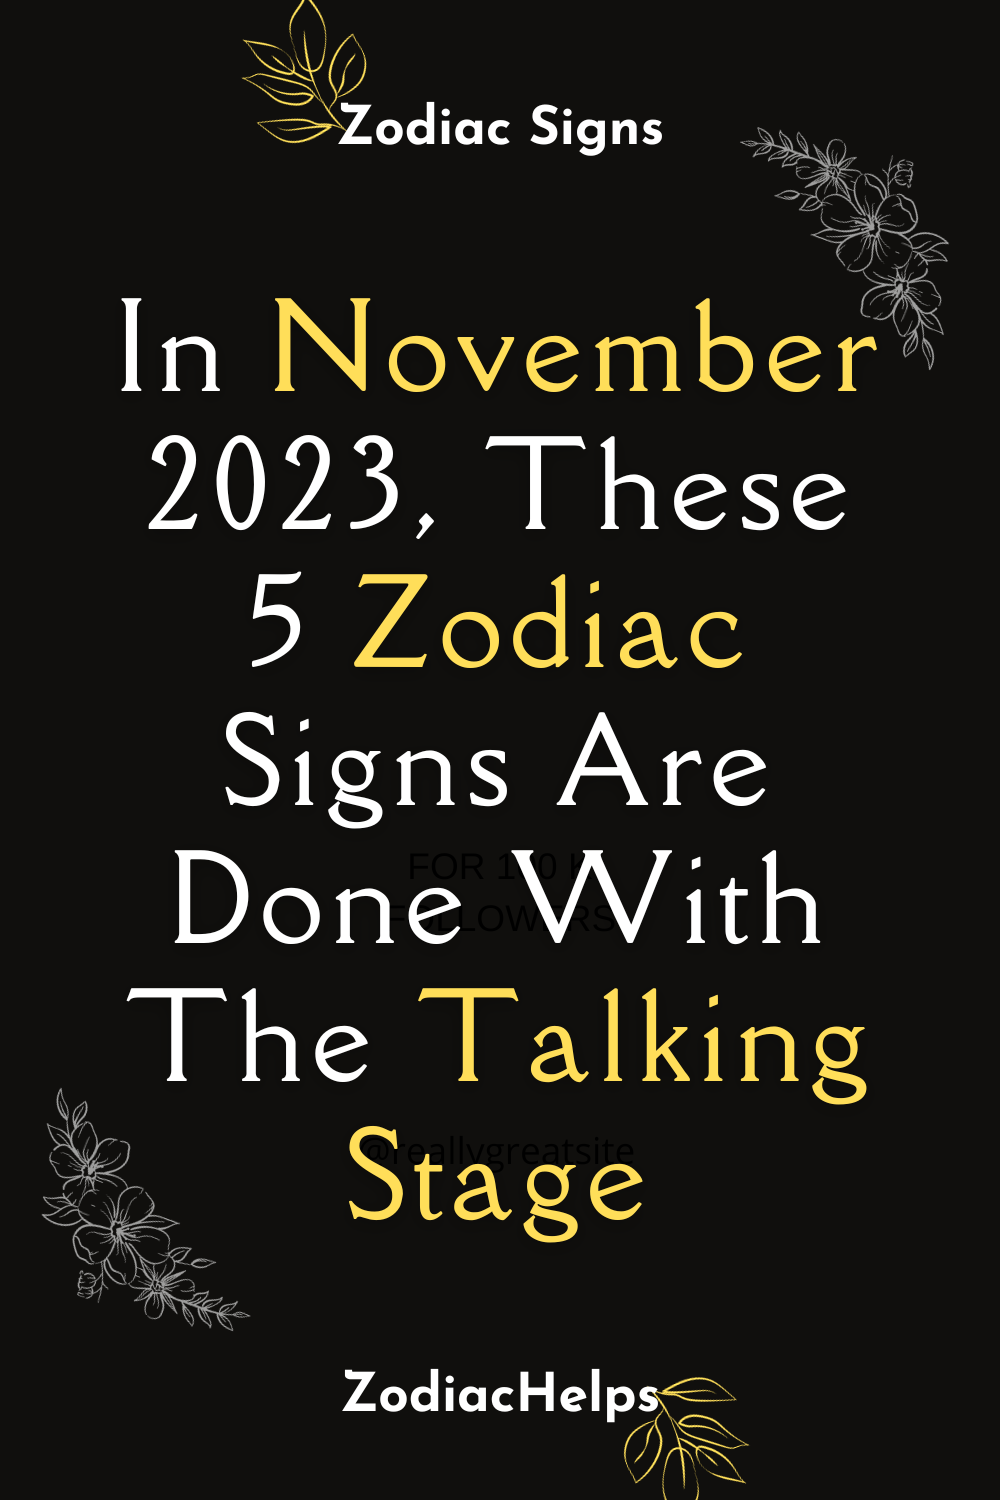 In November 2023, These 5 Zodiac Signs Are Done With The Talking Stage